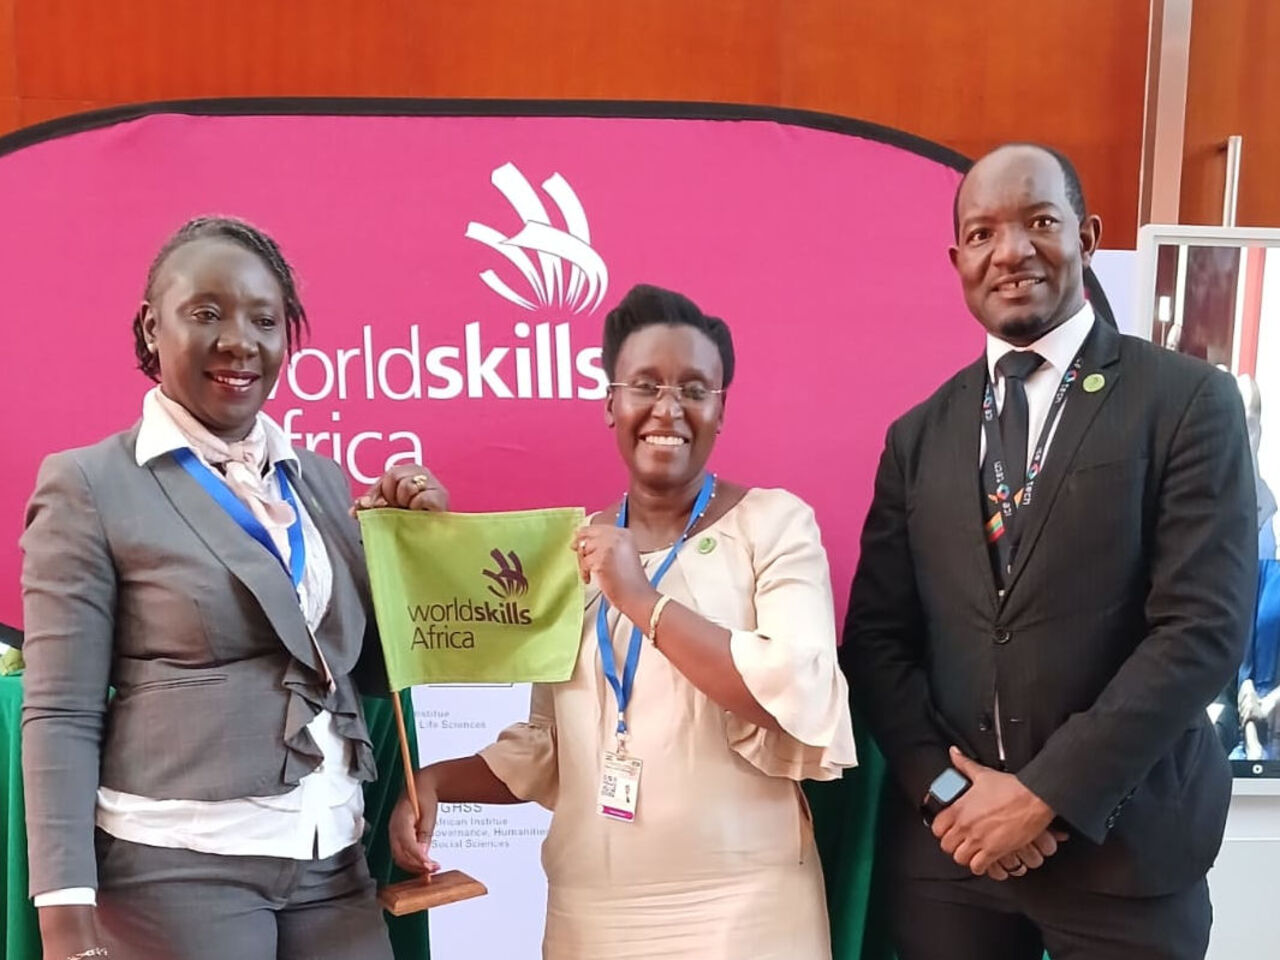 WorldSkills Africa launched today